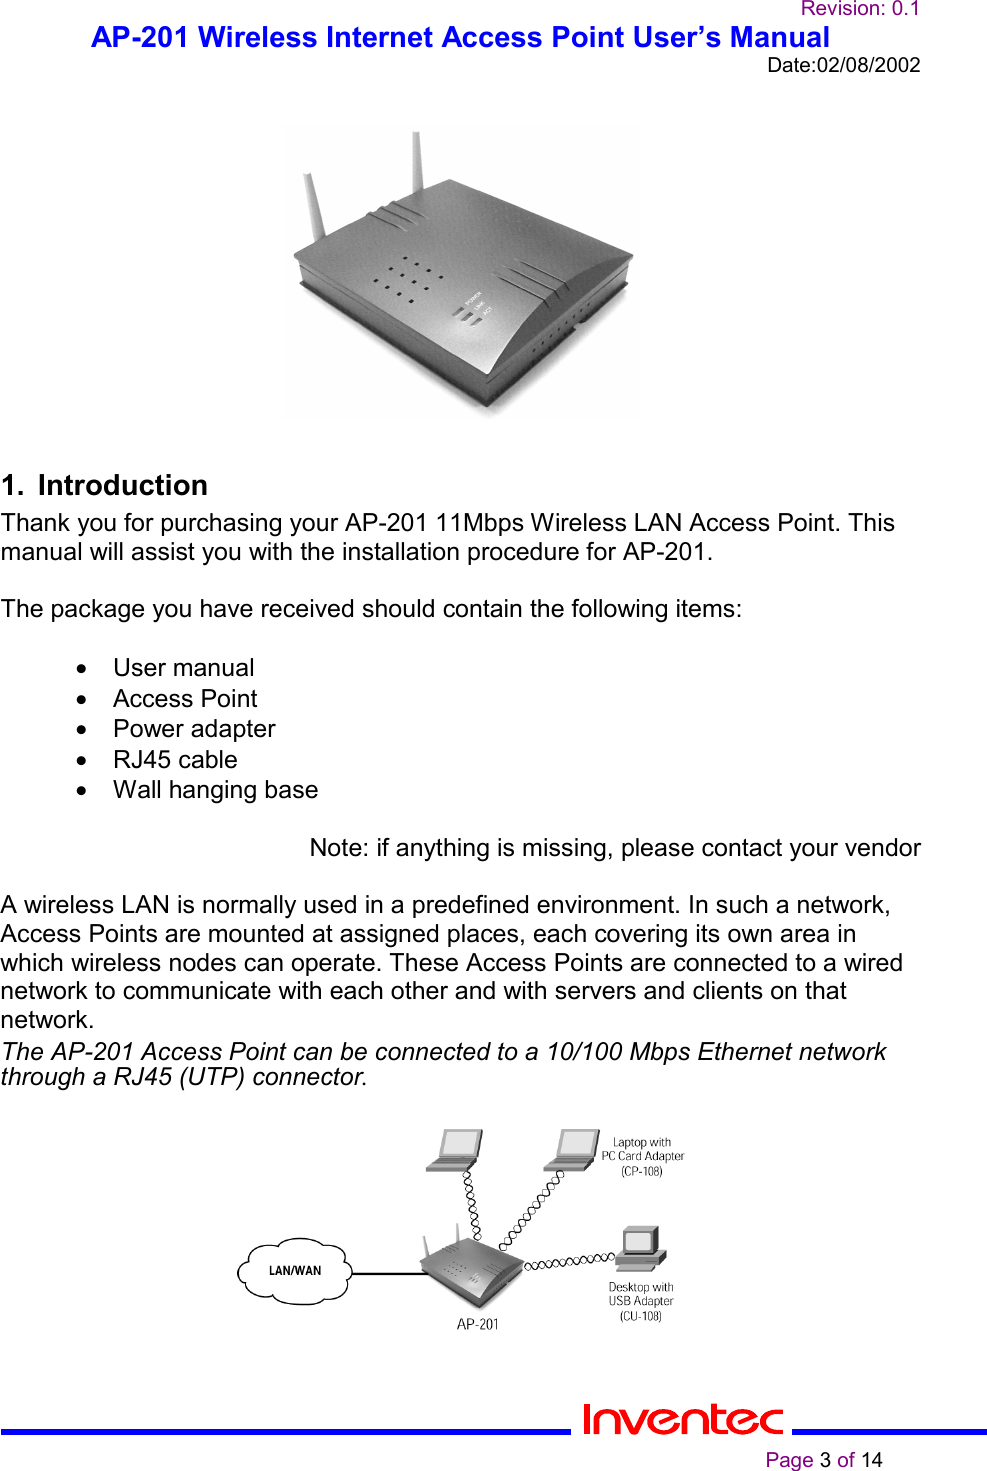 Revision: 0.1AP-201 Wireless Internet Access Point User’s ManualDate:02/08/2002                                                                                                                                                    Page 3 of 141. IntroductionThank you for purchasing your AP-201 11Mbps Wireless LAN Access Point. Thismanual will assist you with the installation procedure for AP-201.The package you have received should contain the following items:• User manual• Access Point• Power adapter• RJ45 cable•  Wall hanging baseNote: if anything is missing, please contact your vendorA wireless LAN is normally used in a predefined environment. In such a network,Access Points are mounted at assigned places, each covering its own area inwhich wireless nodes can operate. These Access Points are connected to a wirednetwork to communicate with each other and with servers and clients on thatnetwork.The AP-201 Access Point can be connected to a 10/100 Mbps Ethernet networkthrough a RJ45 (UTP) connector.